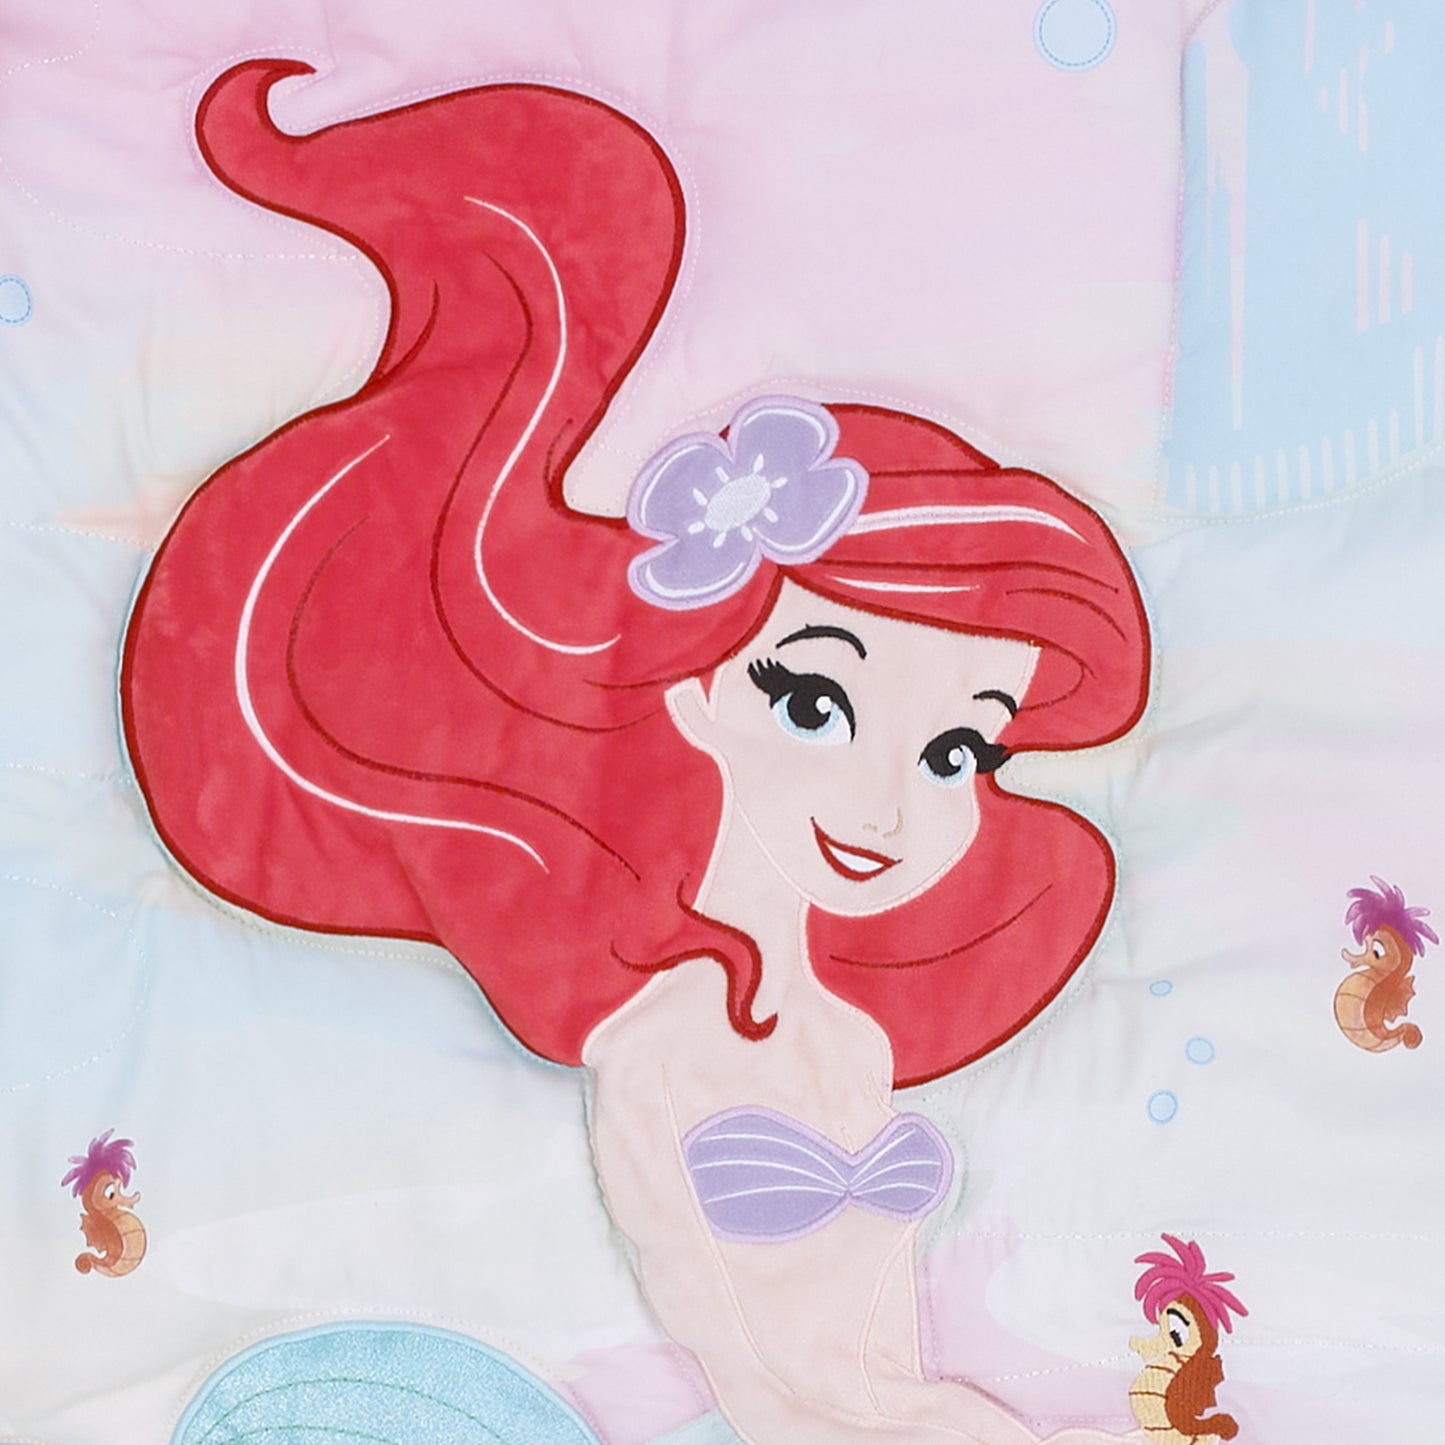 Disney Ariel Watercolor Wishes Aqua, Pink and White 3 Piece Nursery Crib Bedding Set - Comforter, 100% Cotton Fitted Crib Sheet and Crib Skirt